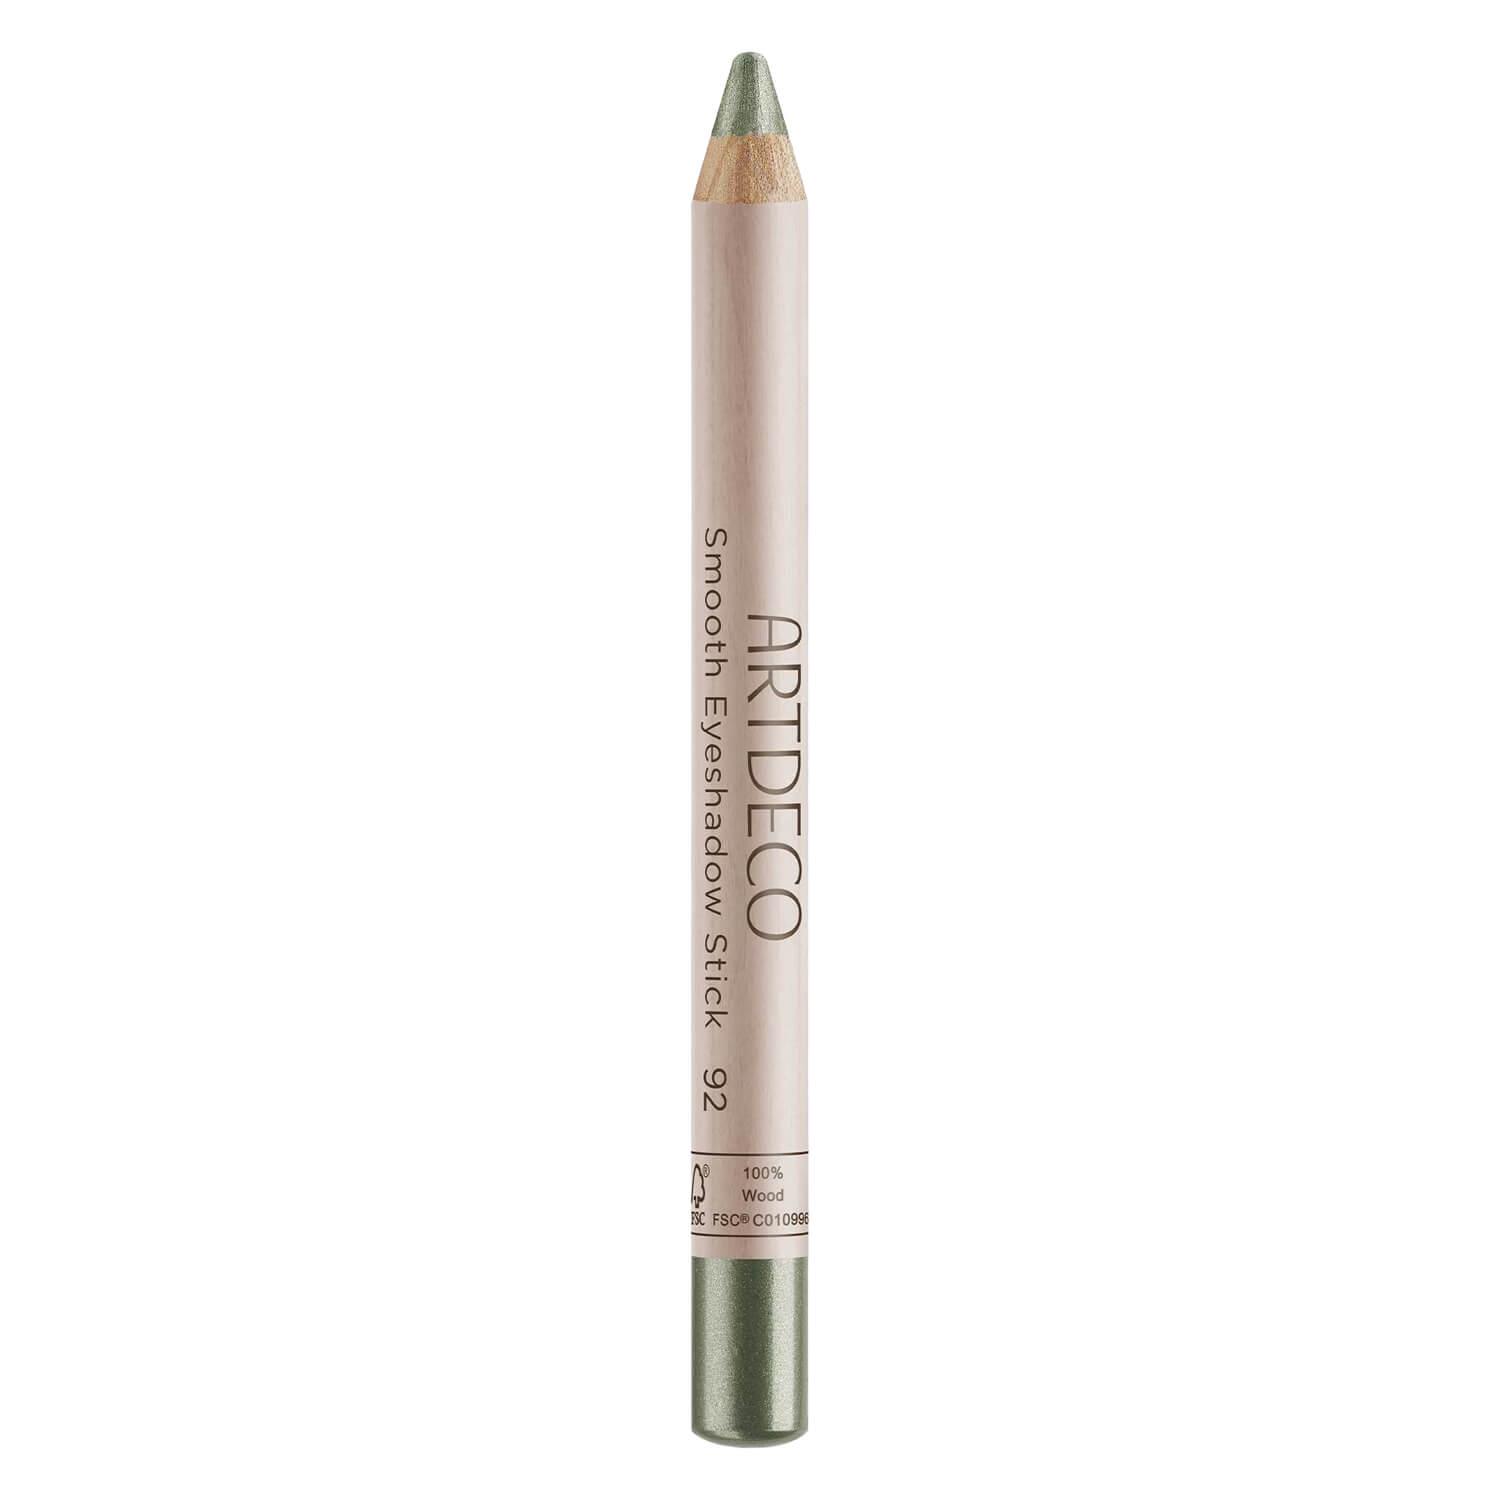 green COUTURE - Smooth Eyeshadow Stick Floral Green 92